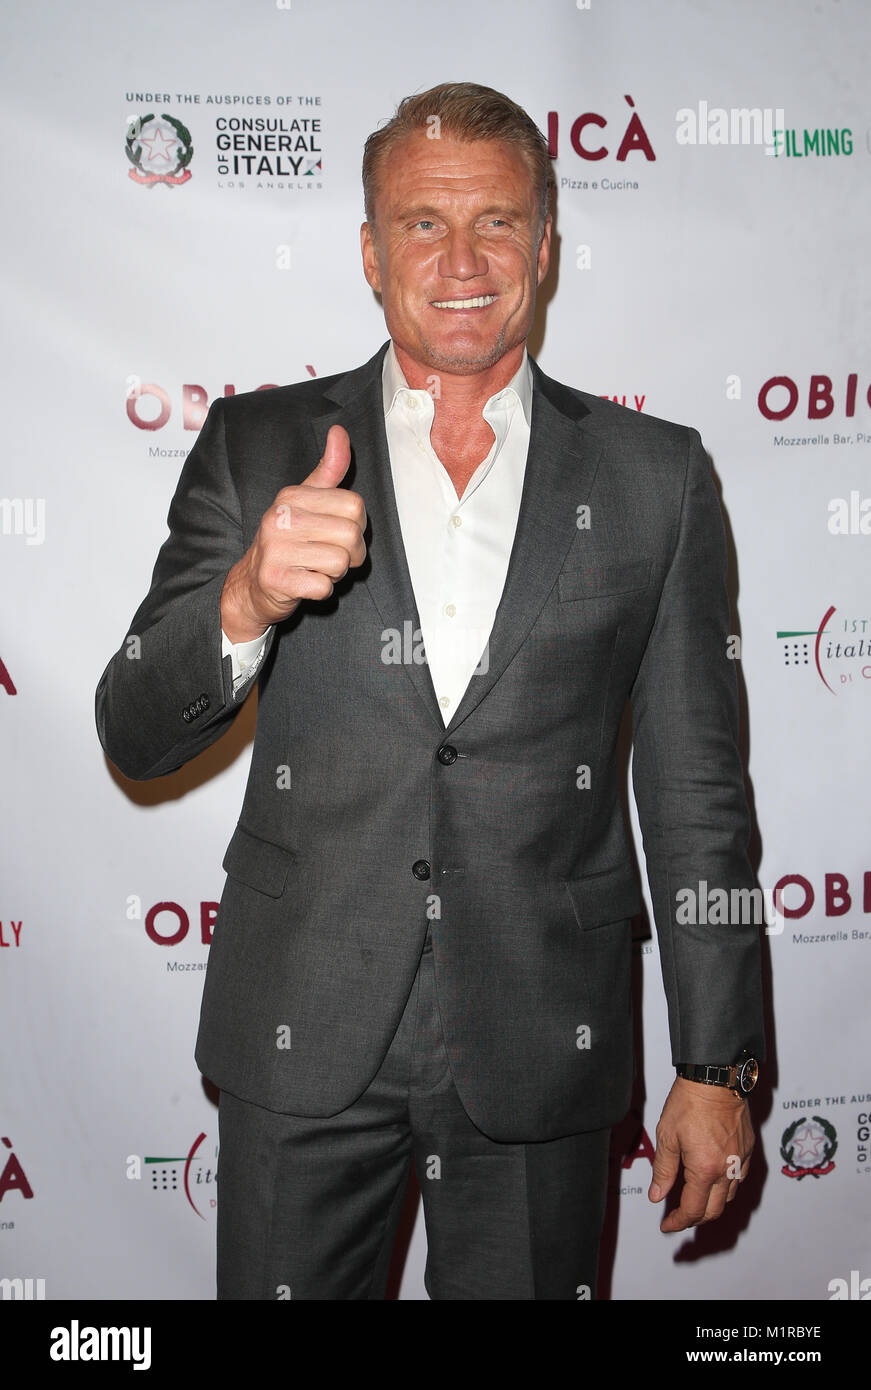 Los Angeles, Ca, USA. 31st Jan, 2018. Dolph Lundgren, at the Filming In Italy In Los Angeles festival Honoring Monica Bellucci with the Filming In Italy and The Italian Institute of Culture Los Angeles Creativity Award and screening of On The Milky Road at Harmony Gold in Los Angeles, California on January 31, 2018. Credit: Faye Sado/Media Punch/Alamy Live News Stock Photo